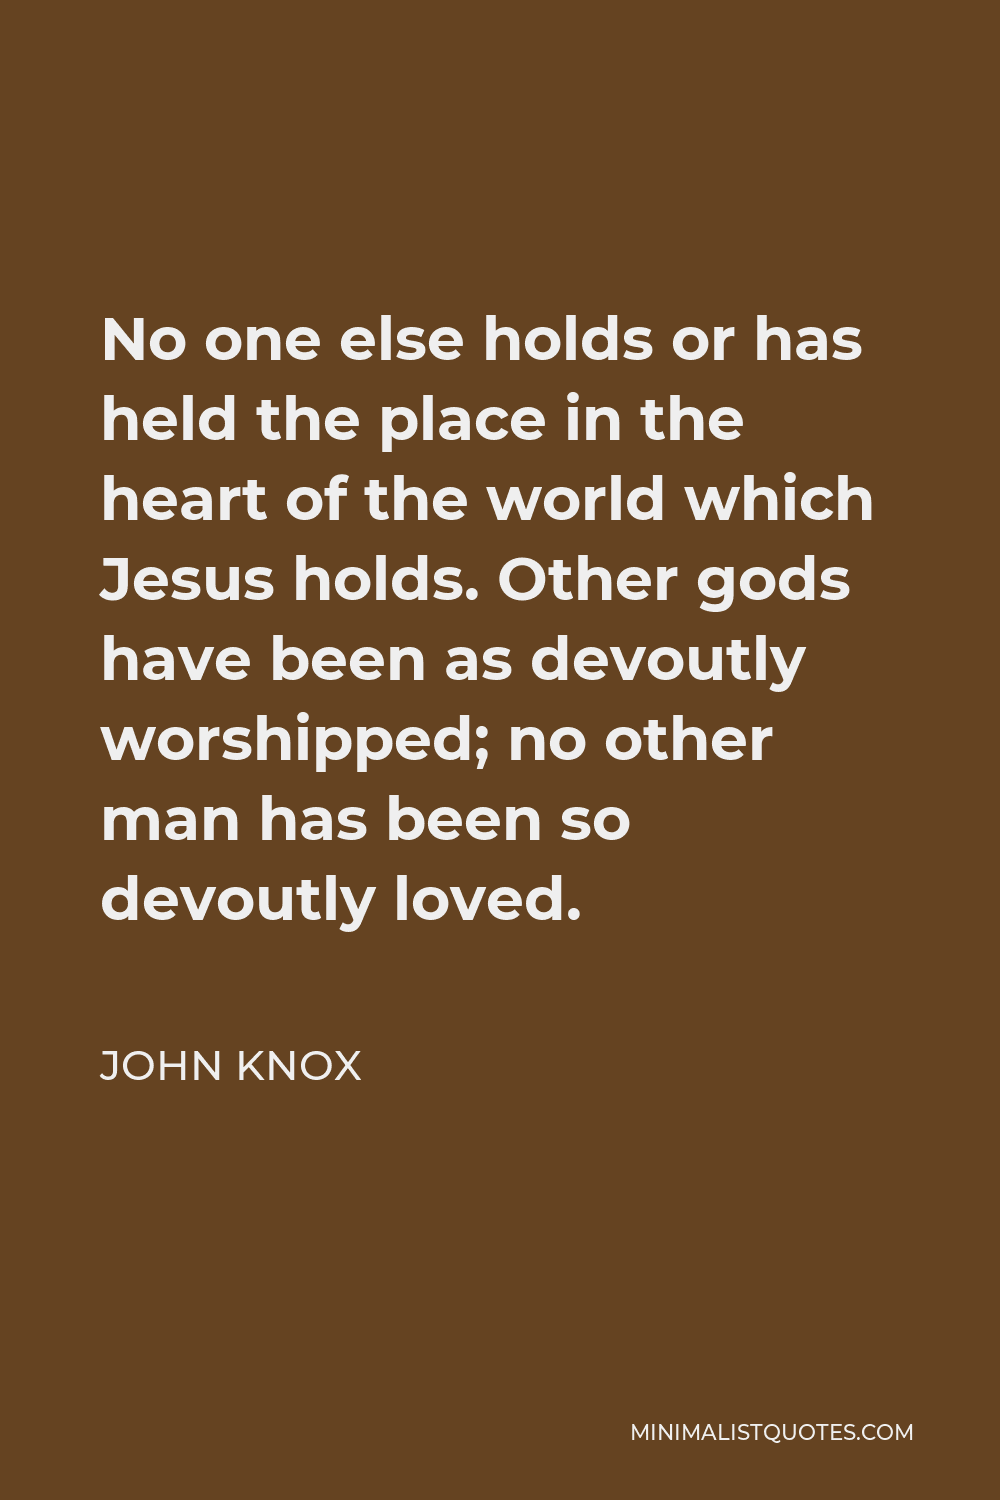 John Knox Quote - No one else holds or has held the place in the heart of the world which Jesus holds. Other gods have been as devoutly worshipped; no other man has been so devoutly loved.